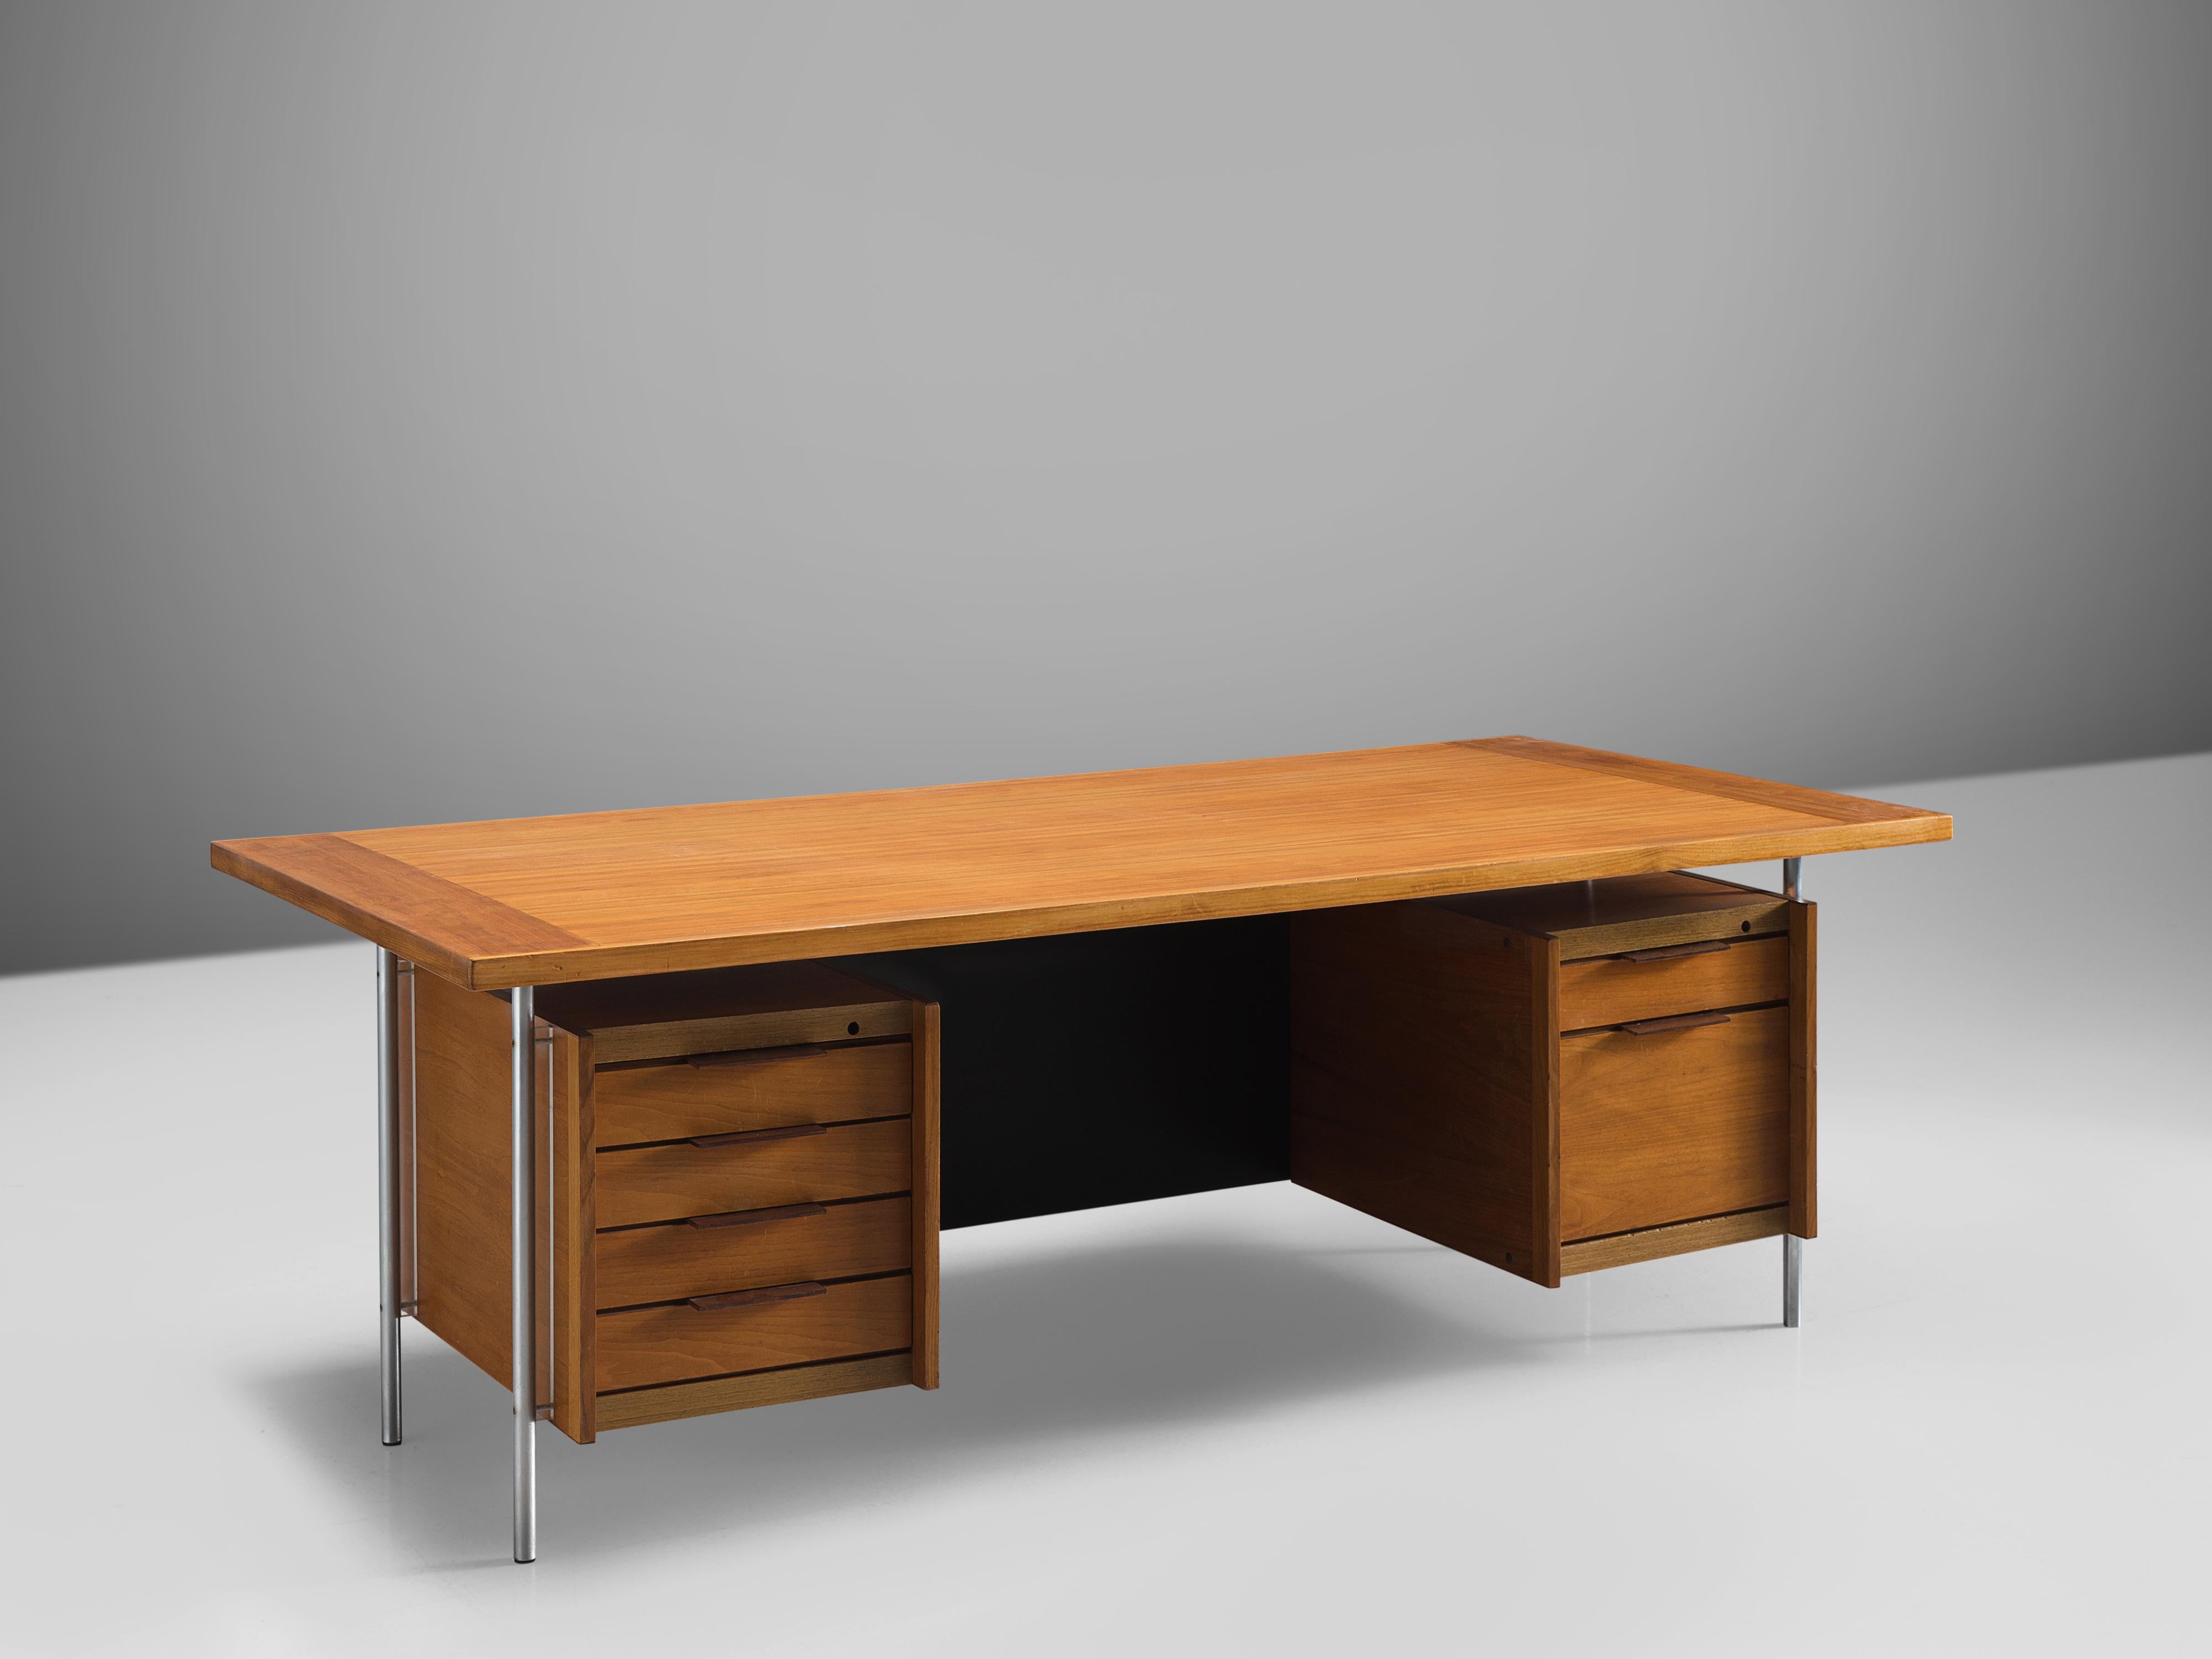 Sven Ivar Dysthe for Dokka Møbler, desk, walnut, leather, chromed steel, plexiglass, Norway, 1960s

This refined desk is designed by the Norwegian designer Sven Ivar Dysthe. The desk has four tubular steel legs that are adjusted on the outside of